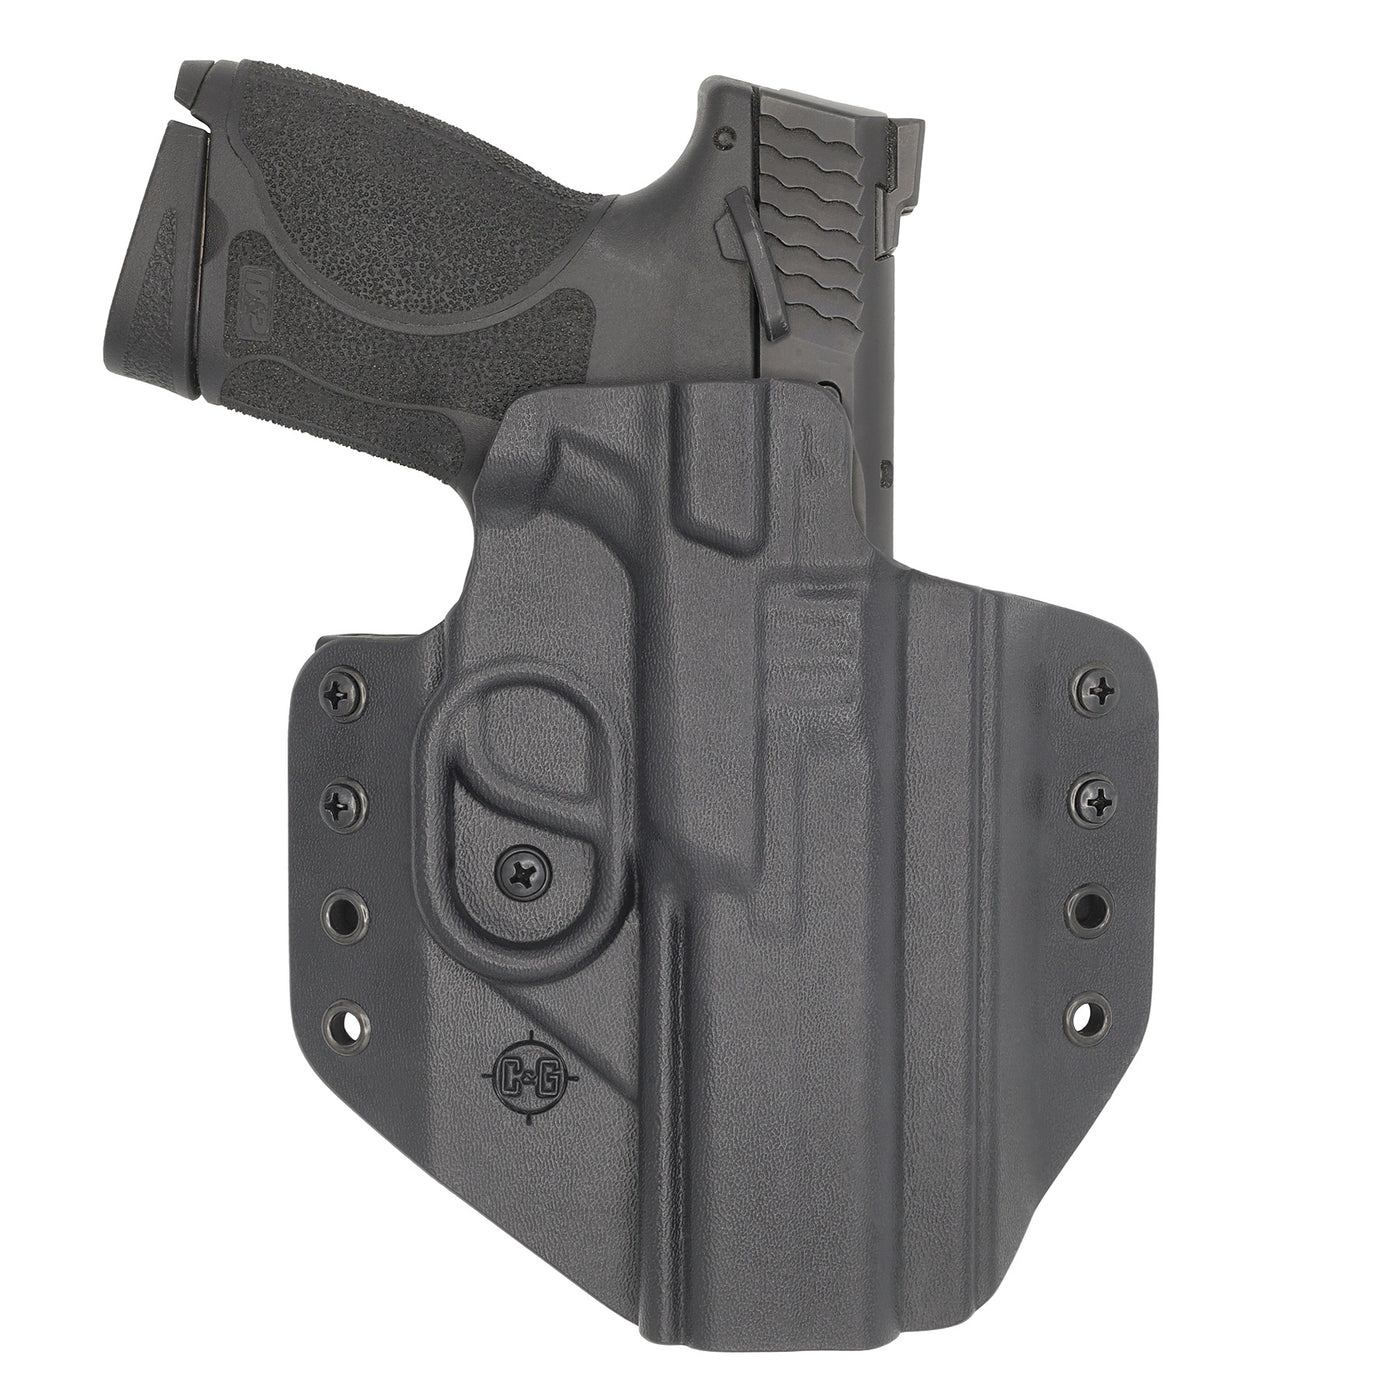 C&G Holsters quickship OWB Covert S&W M&P .45cal 5" in holstered position